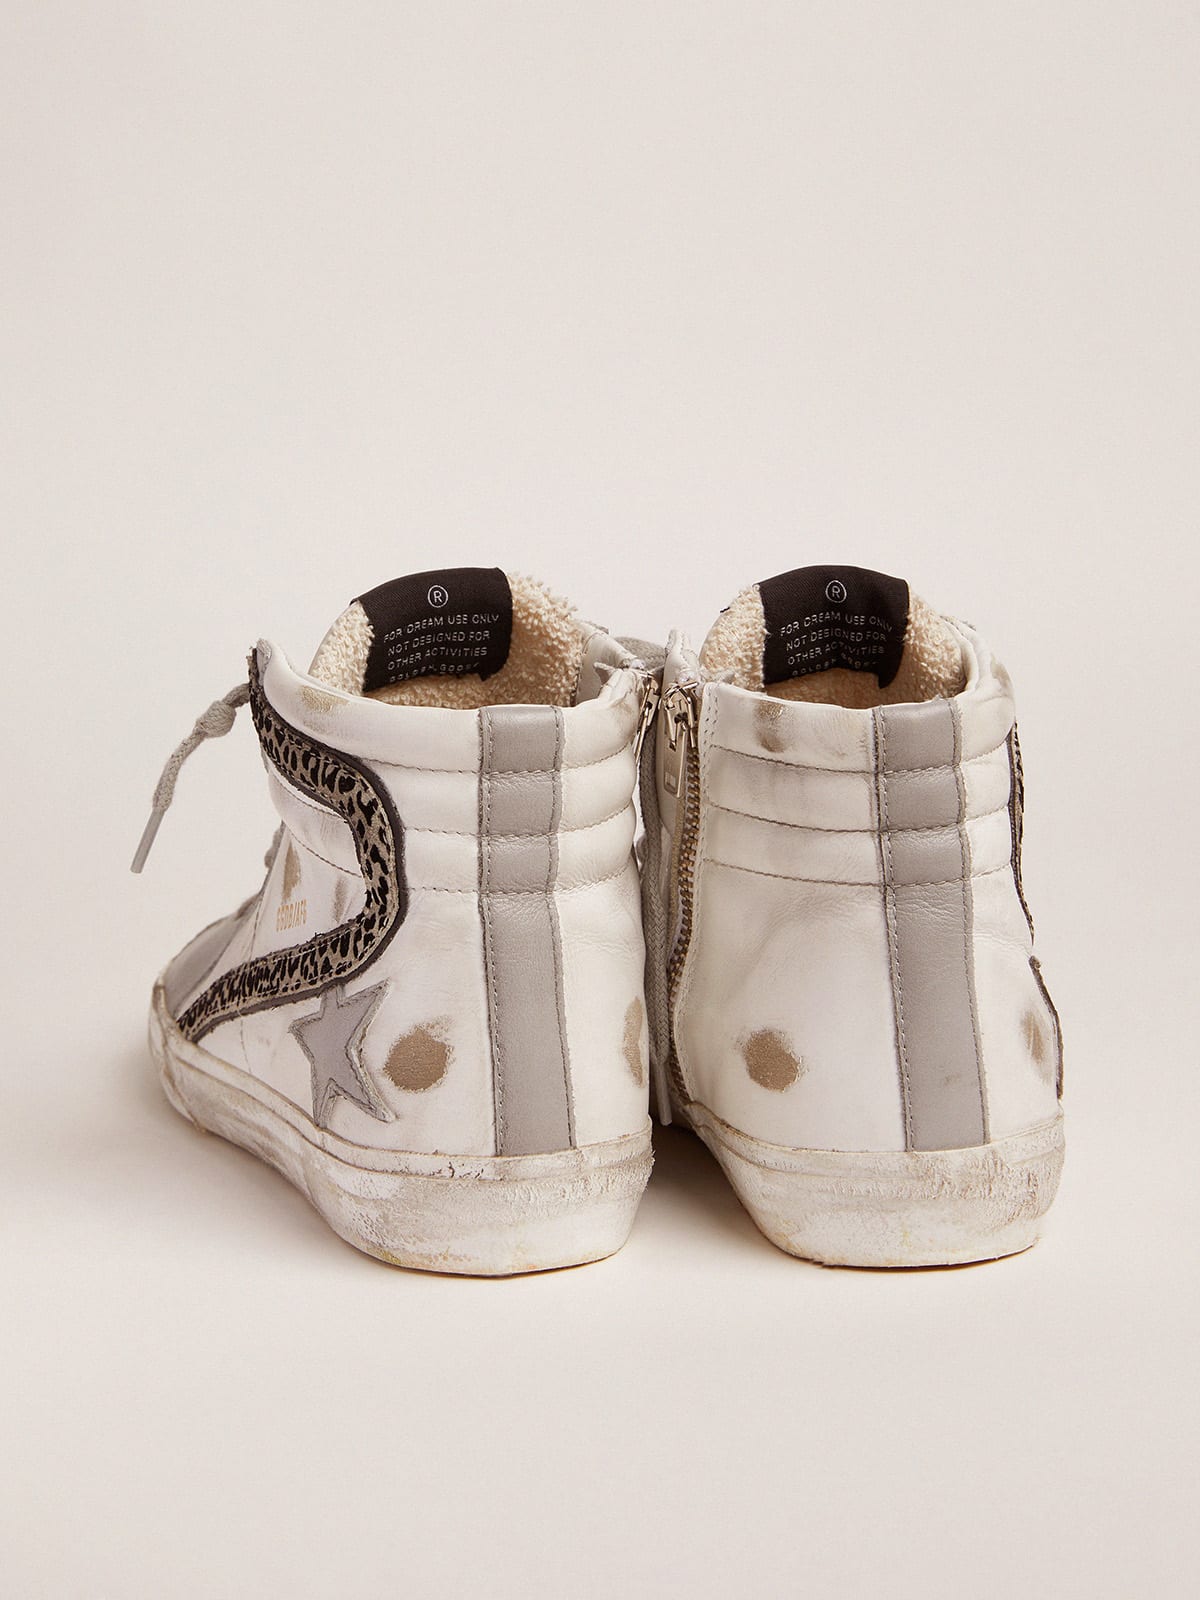 Slide sneakers with white and gray leather upper and leopard-print suede  flash | Golden Goose